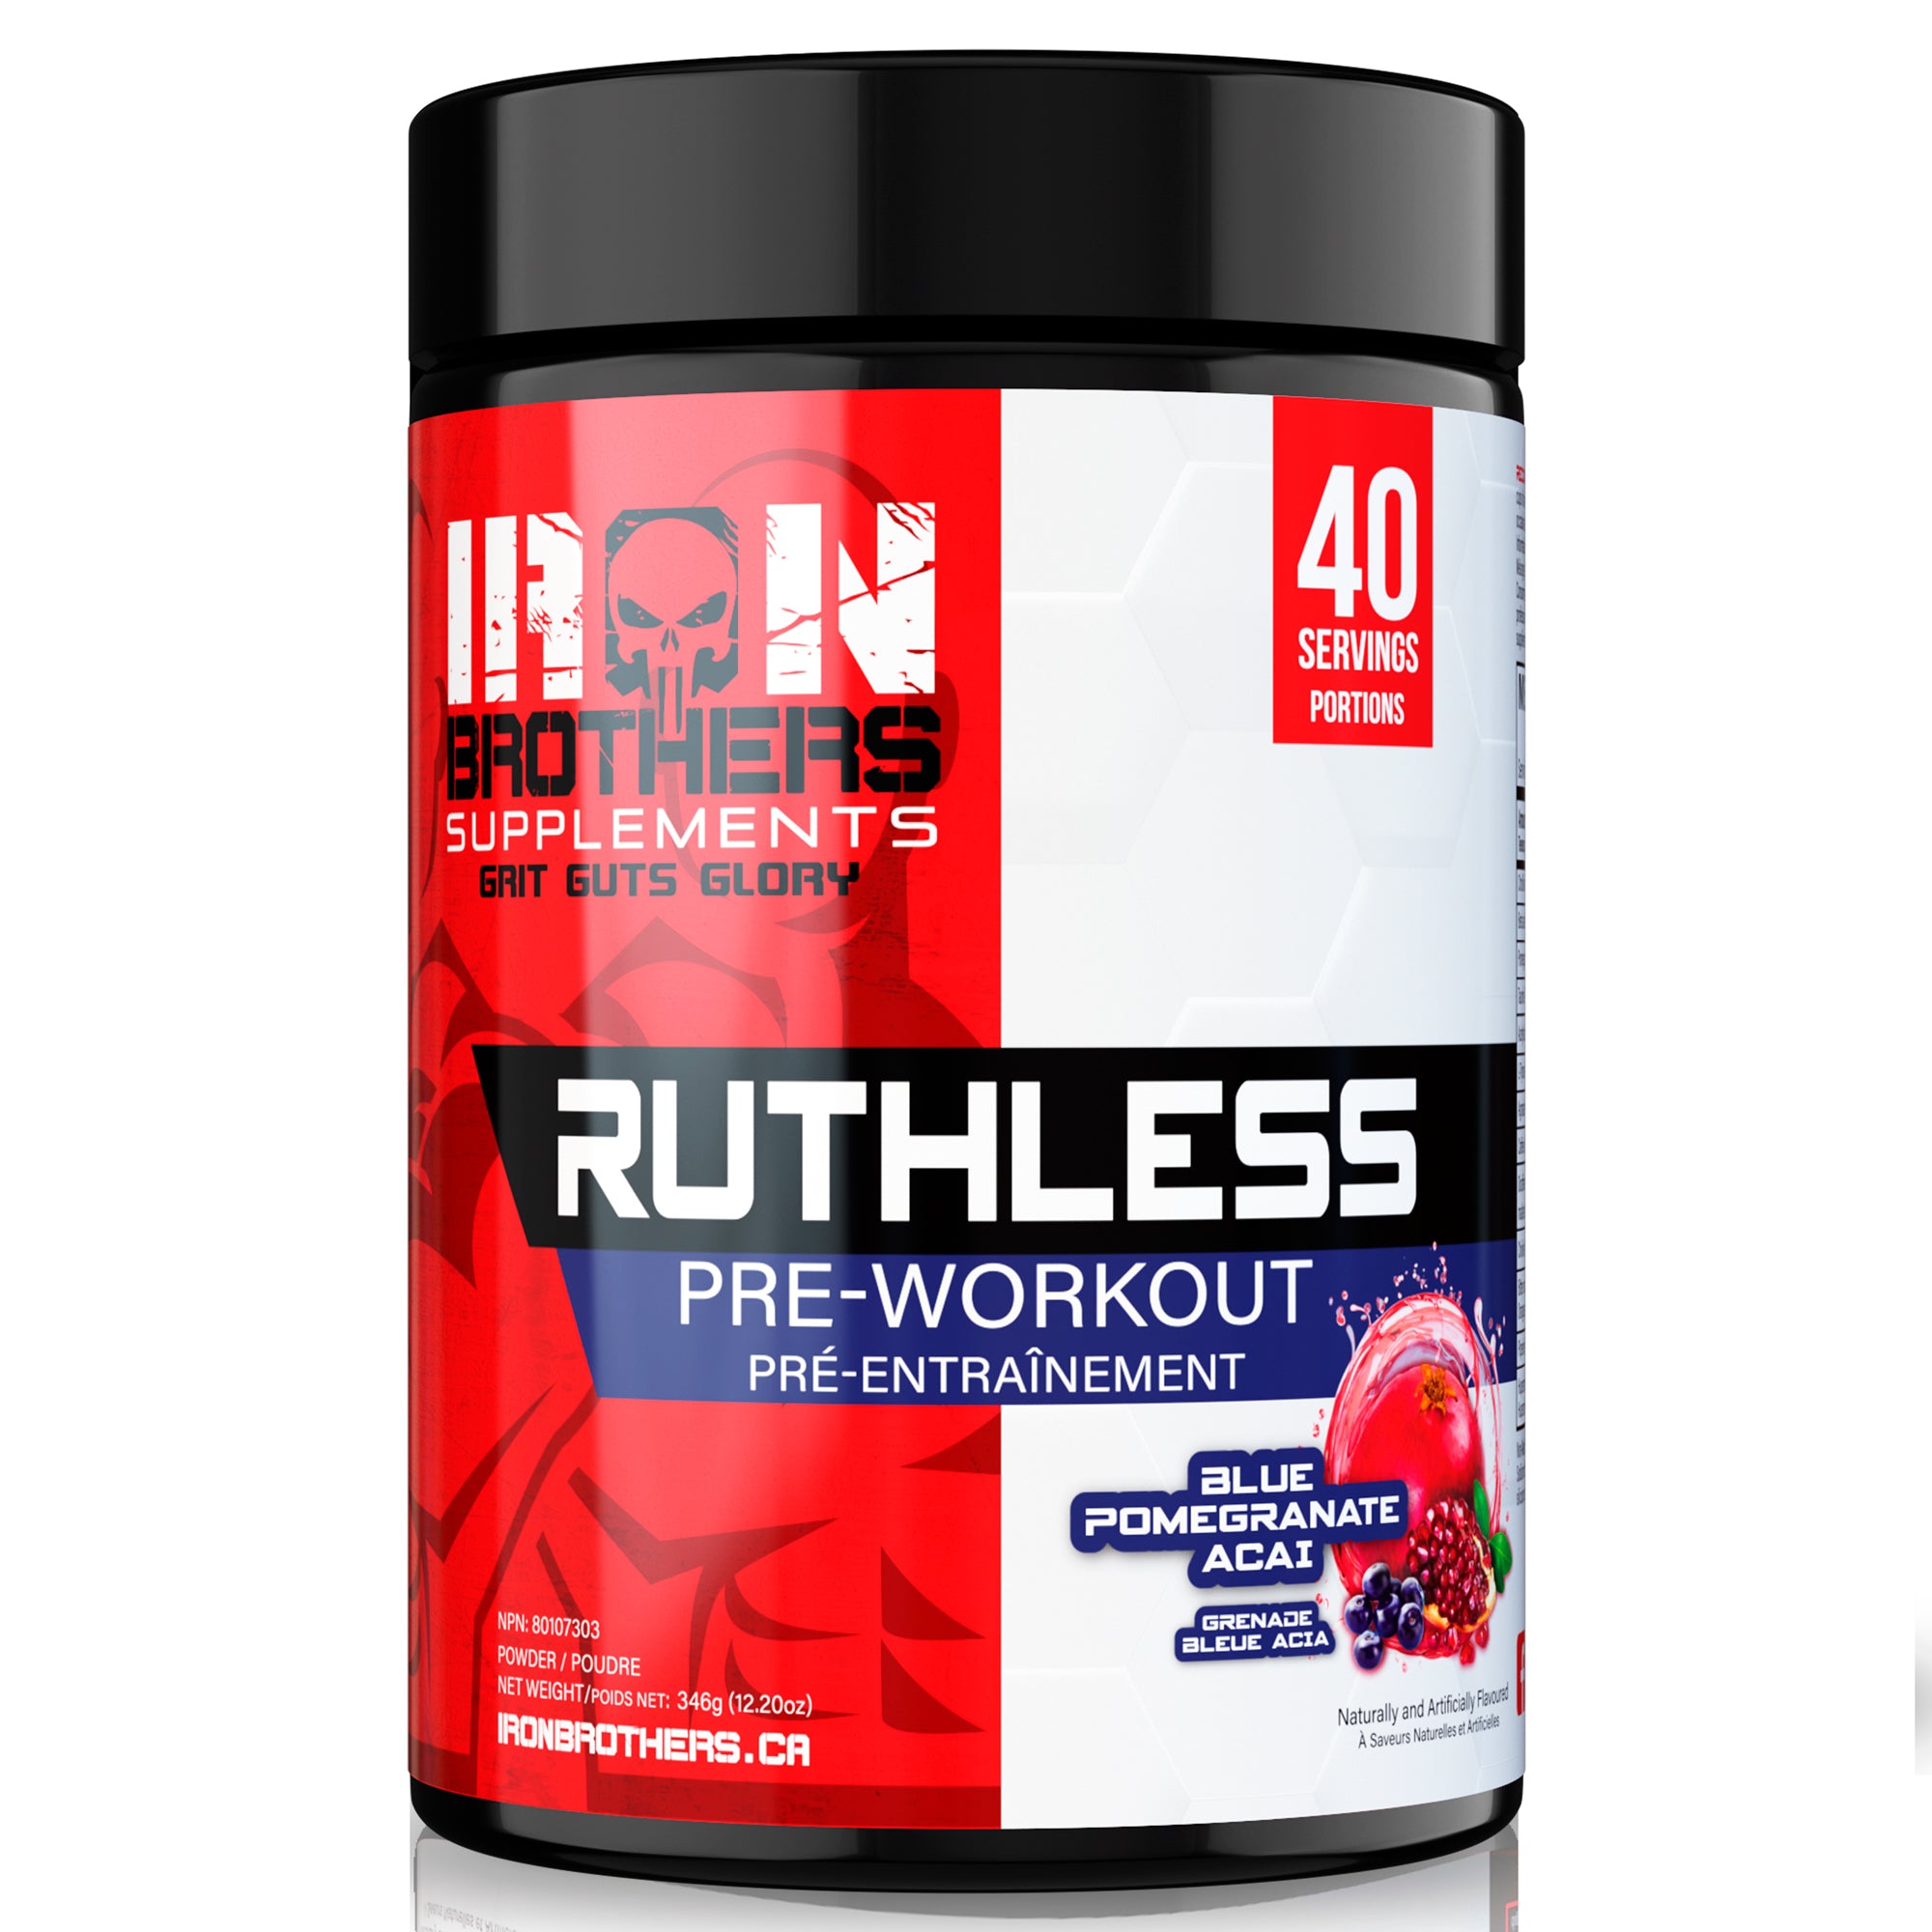 Ruthless Pre-Workout